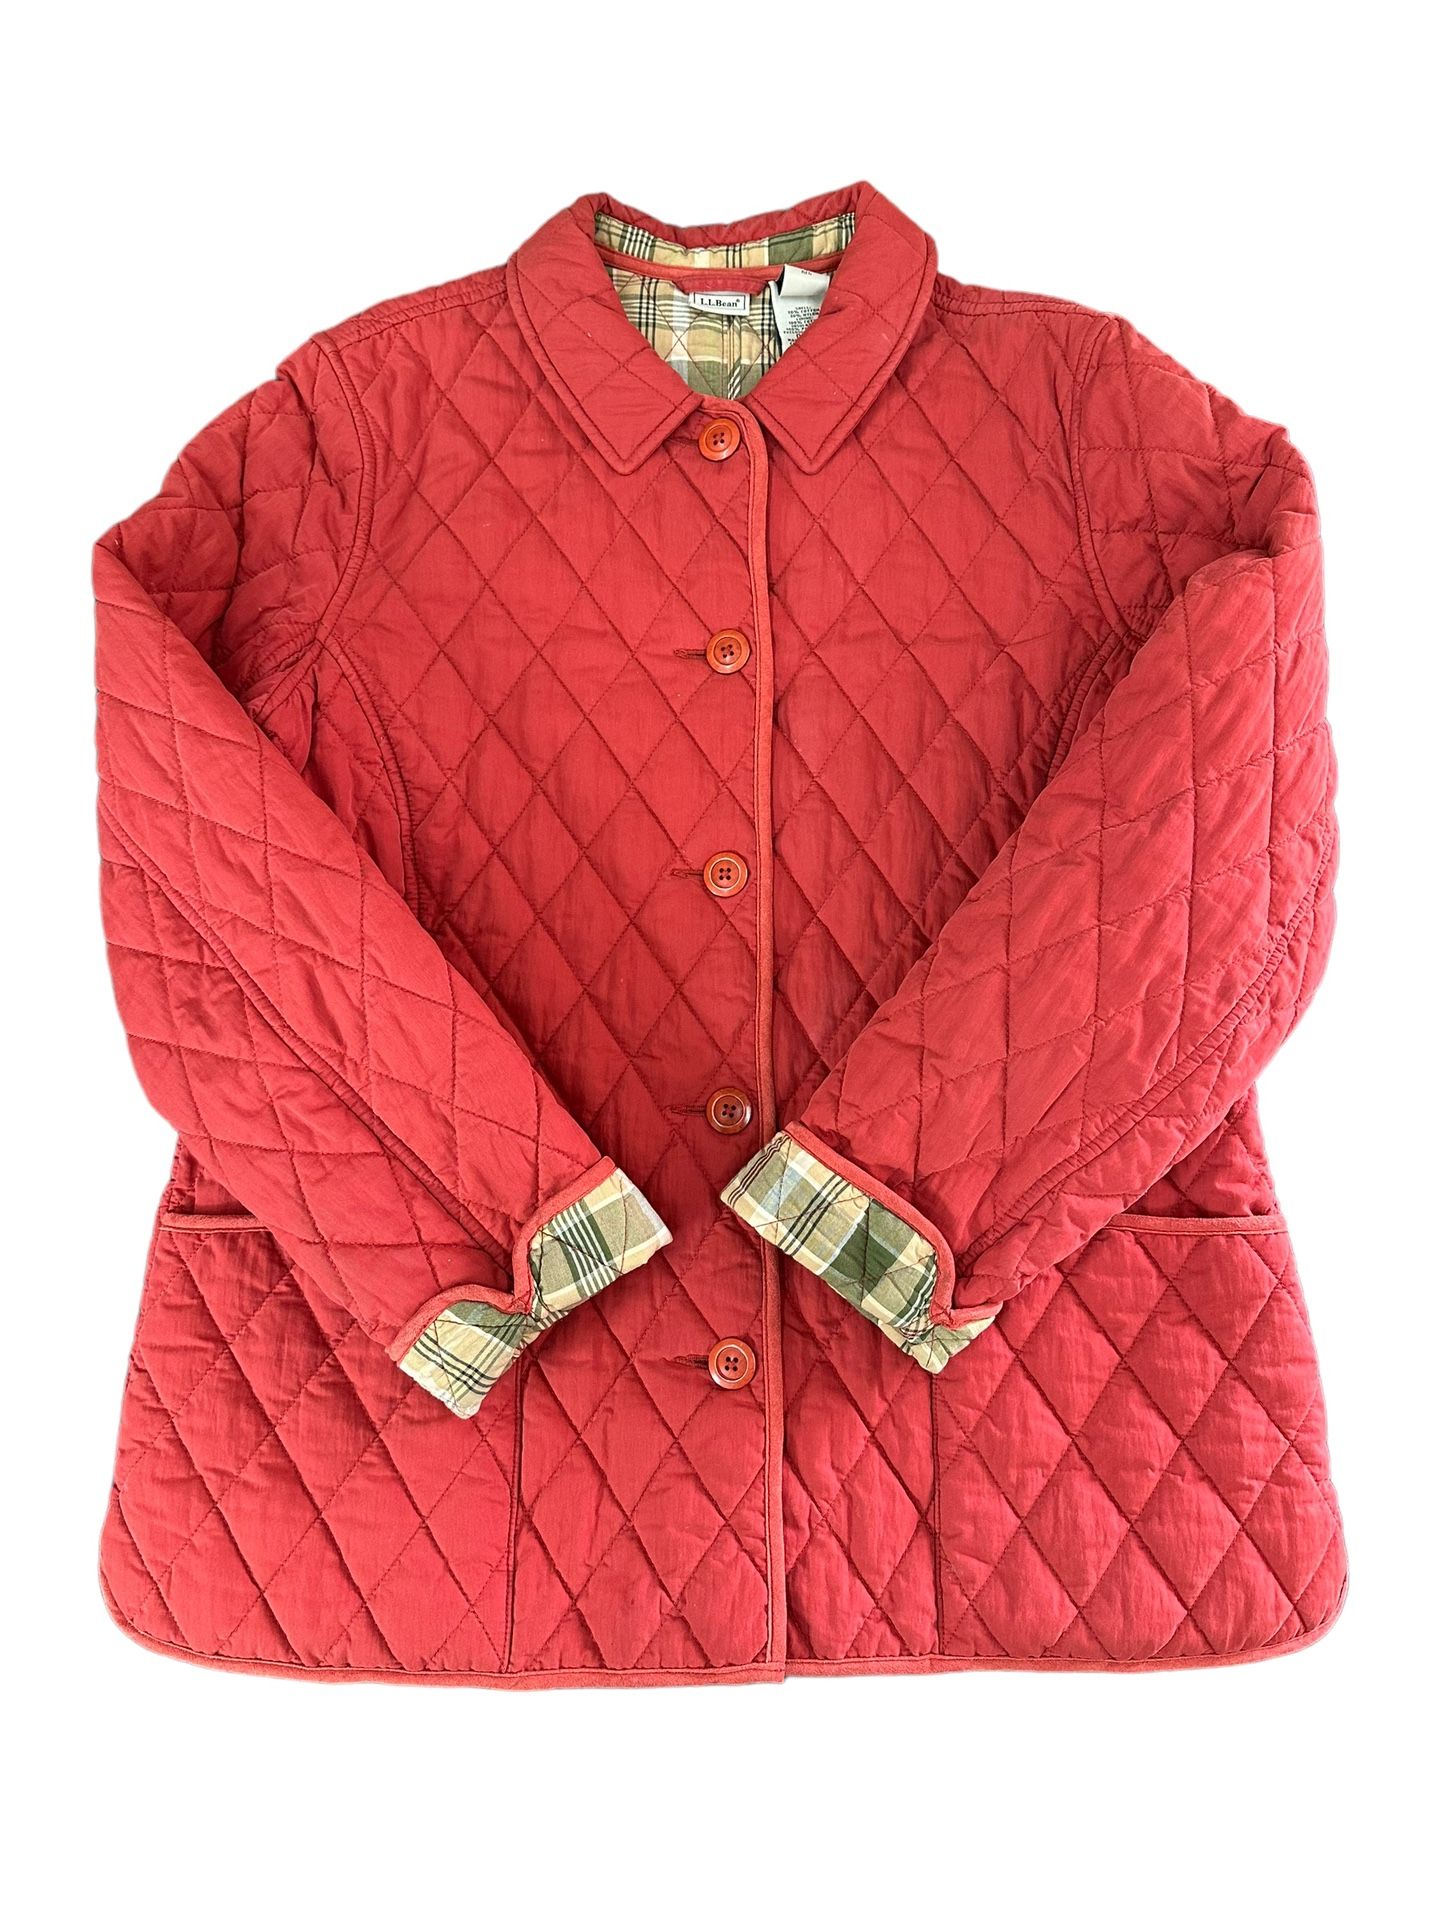 L.L. BEAN QUILTED Coat Women’s Large Pink Plaid Lined Button Riding Chore Barb